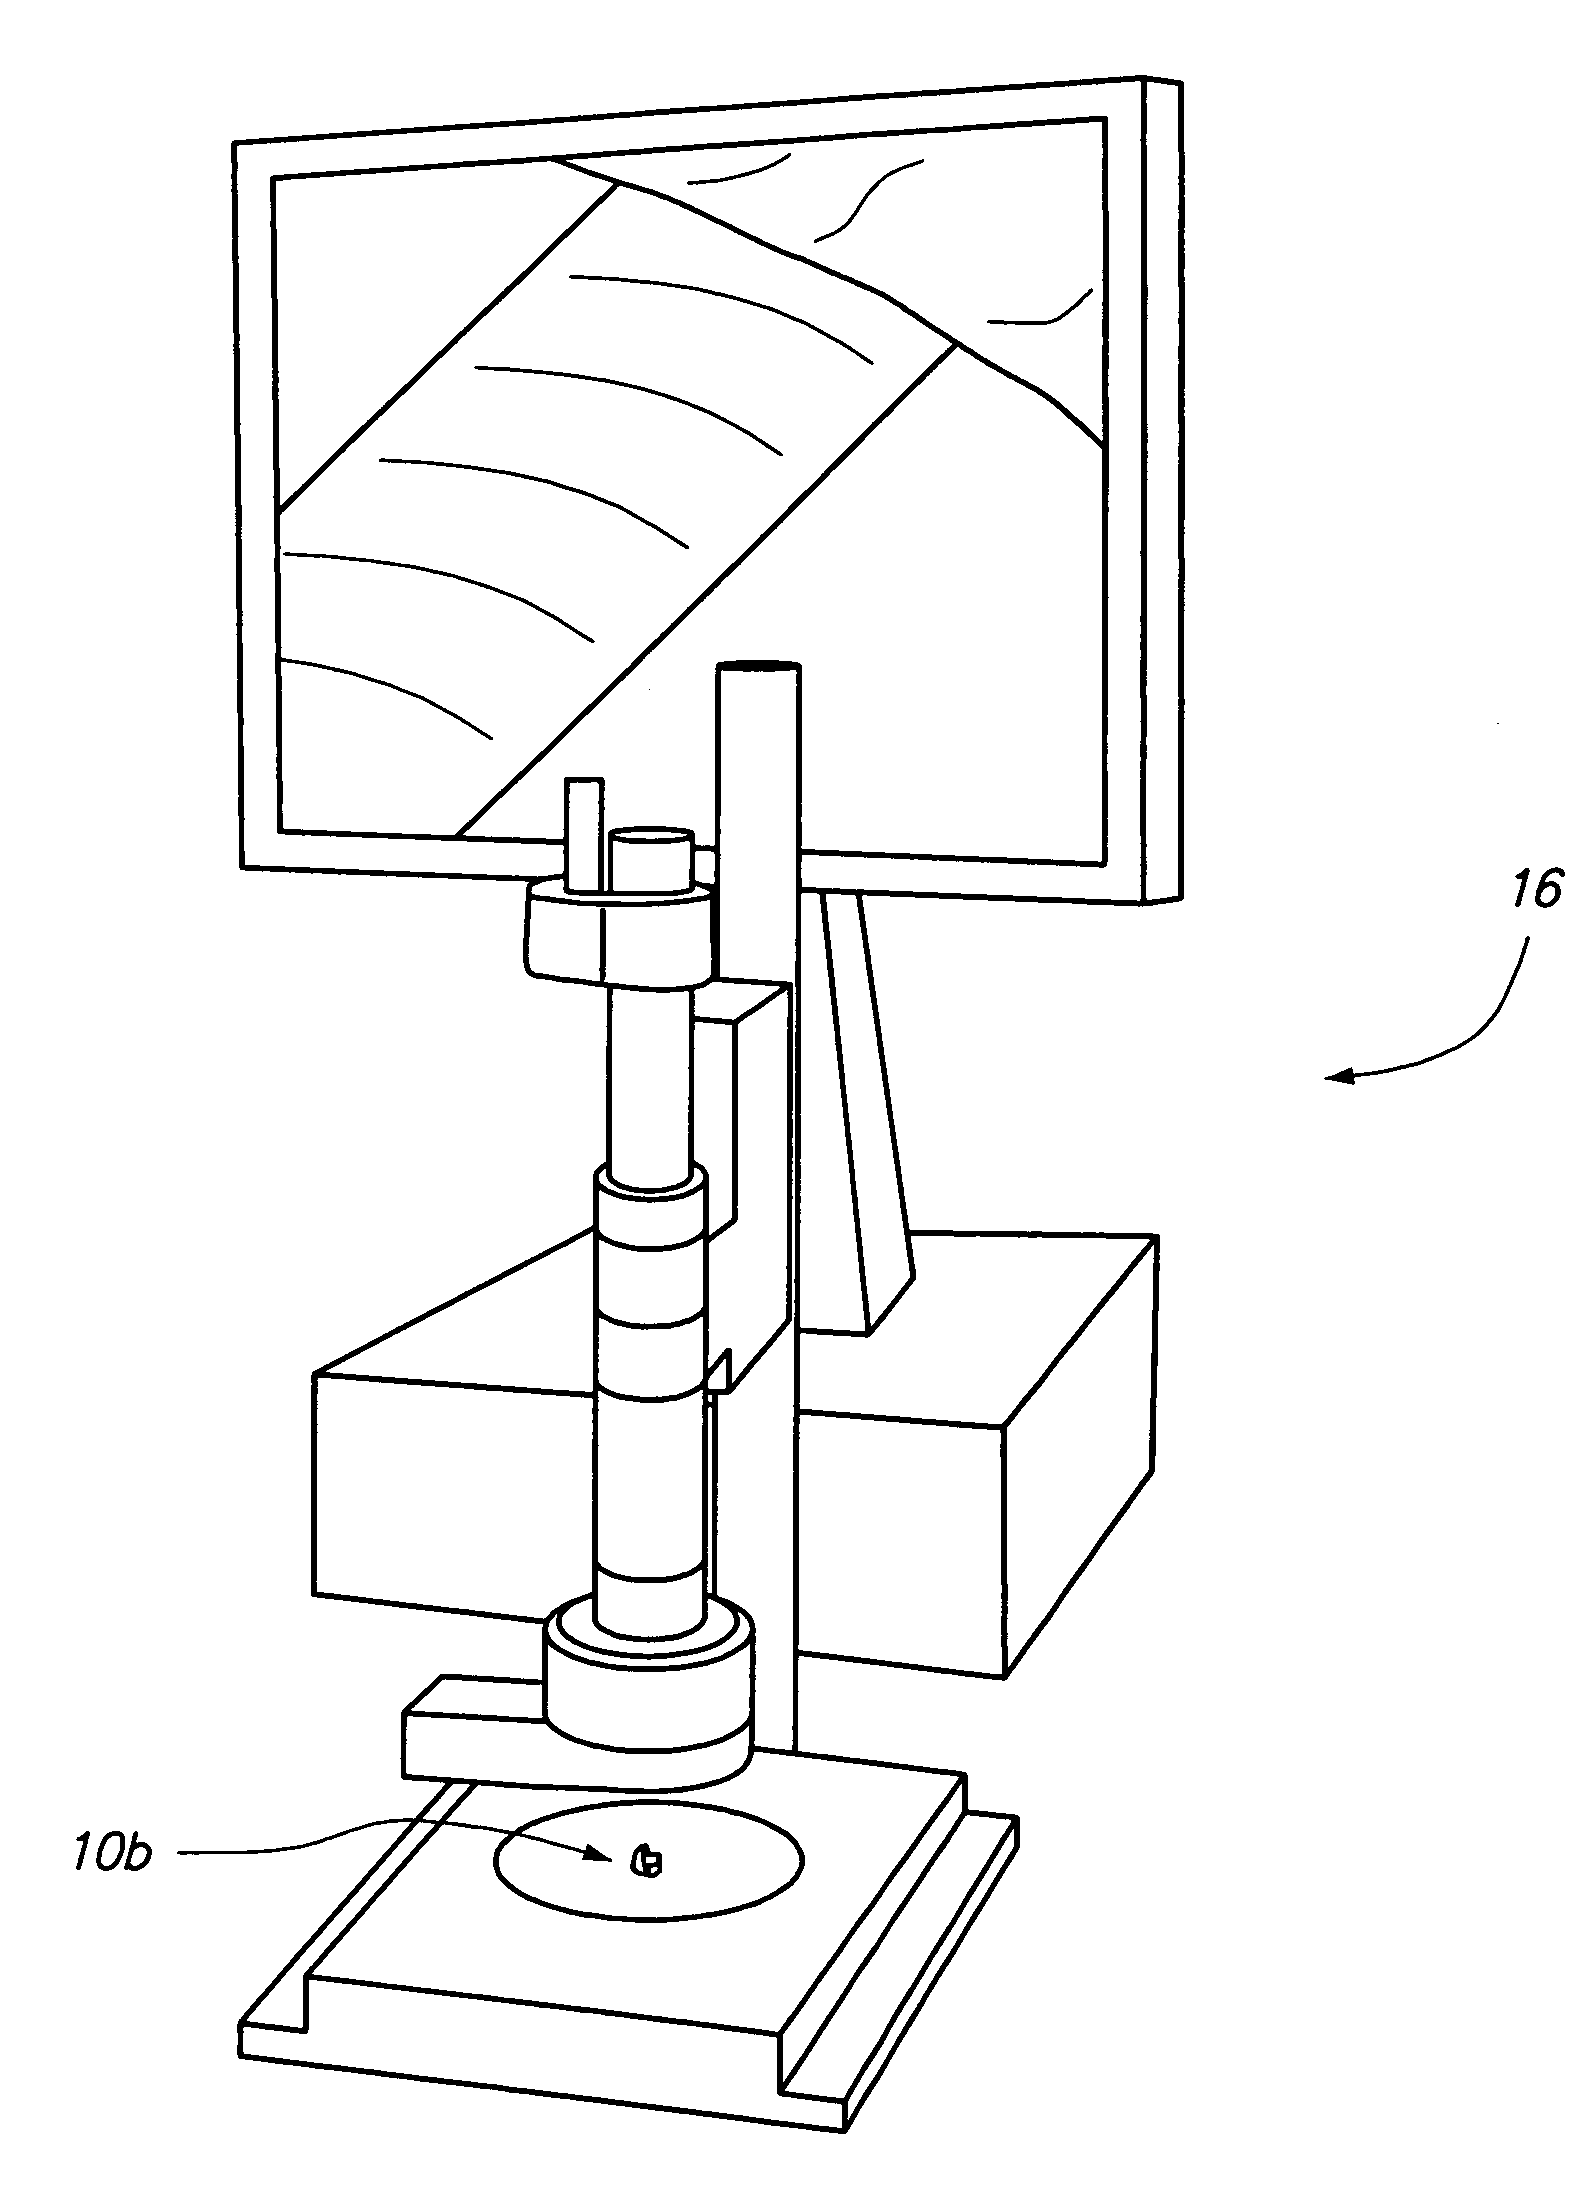 Method for surface replication via thermoplastic media